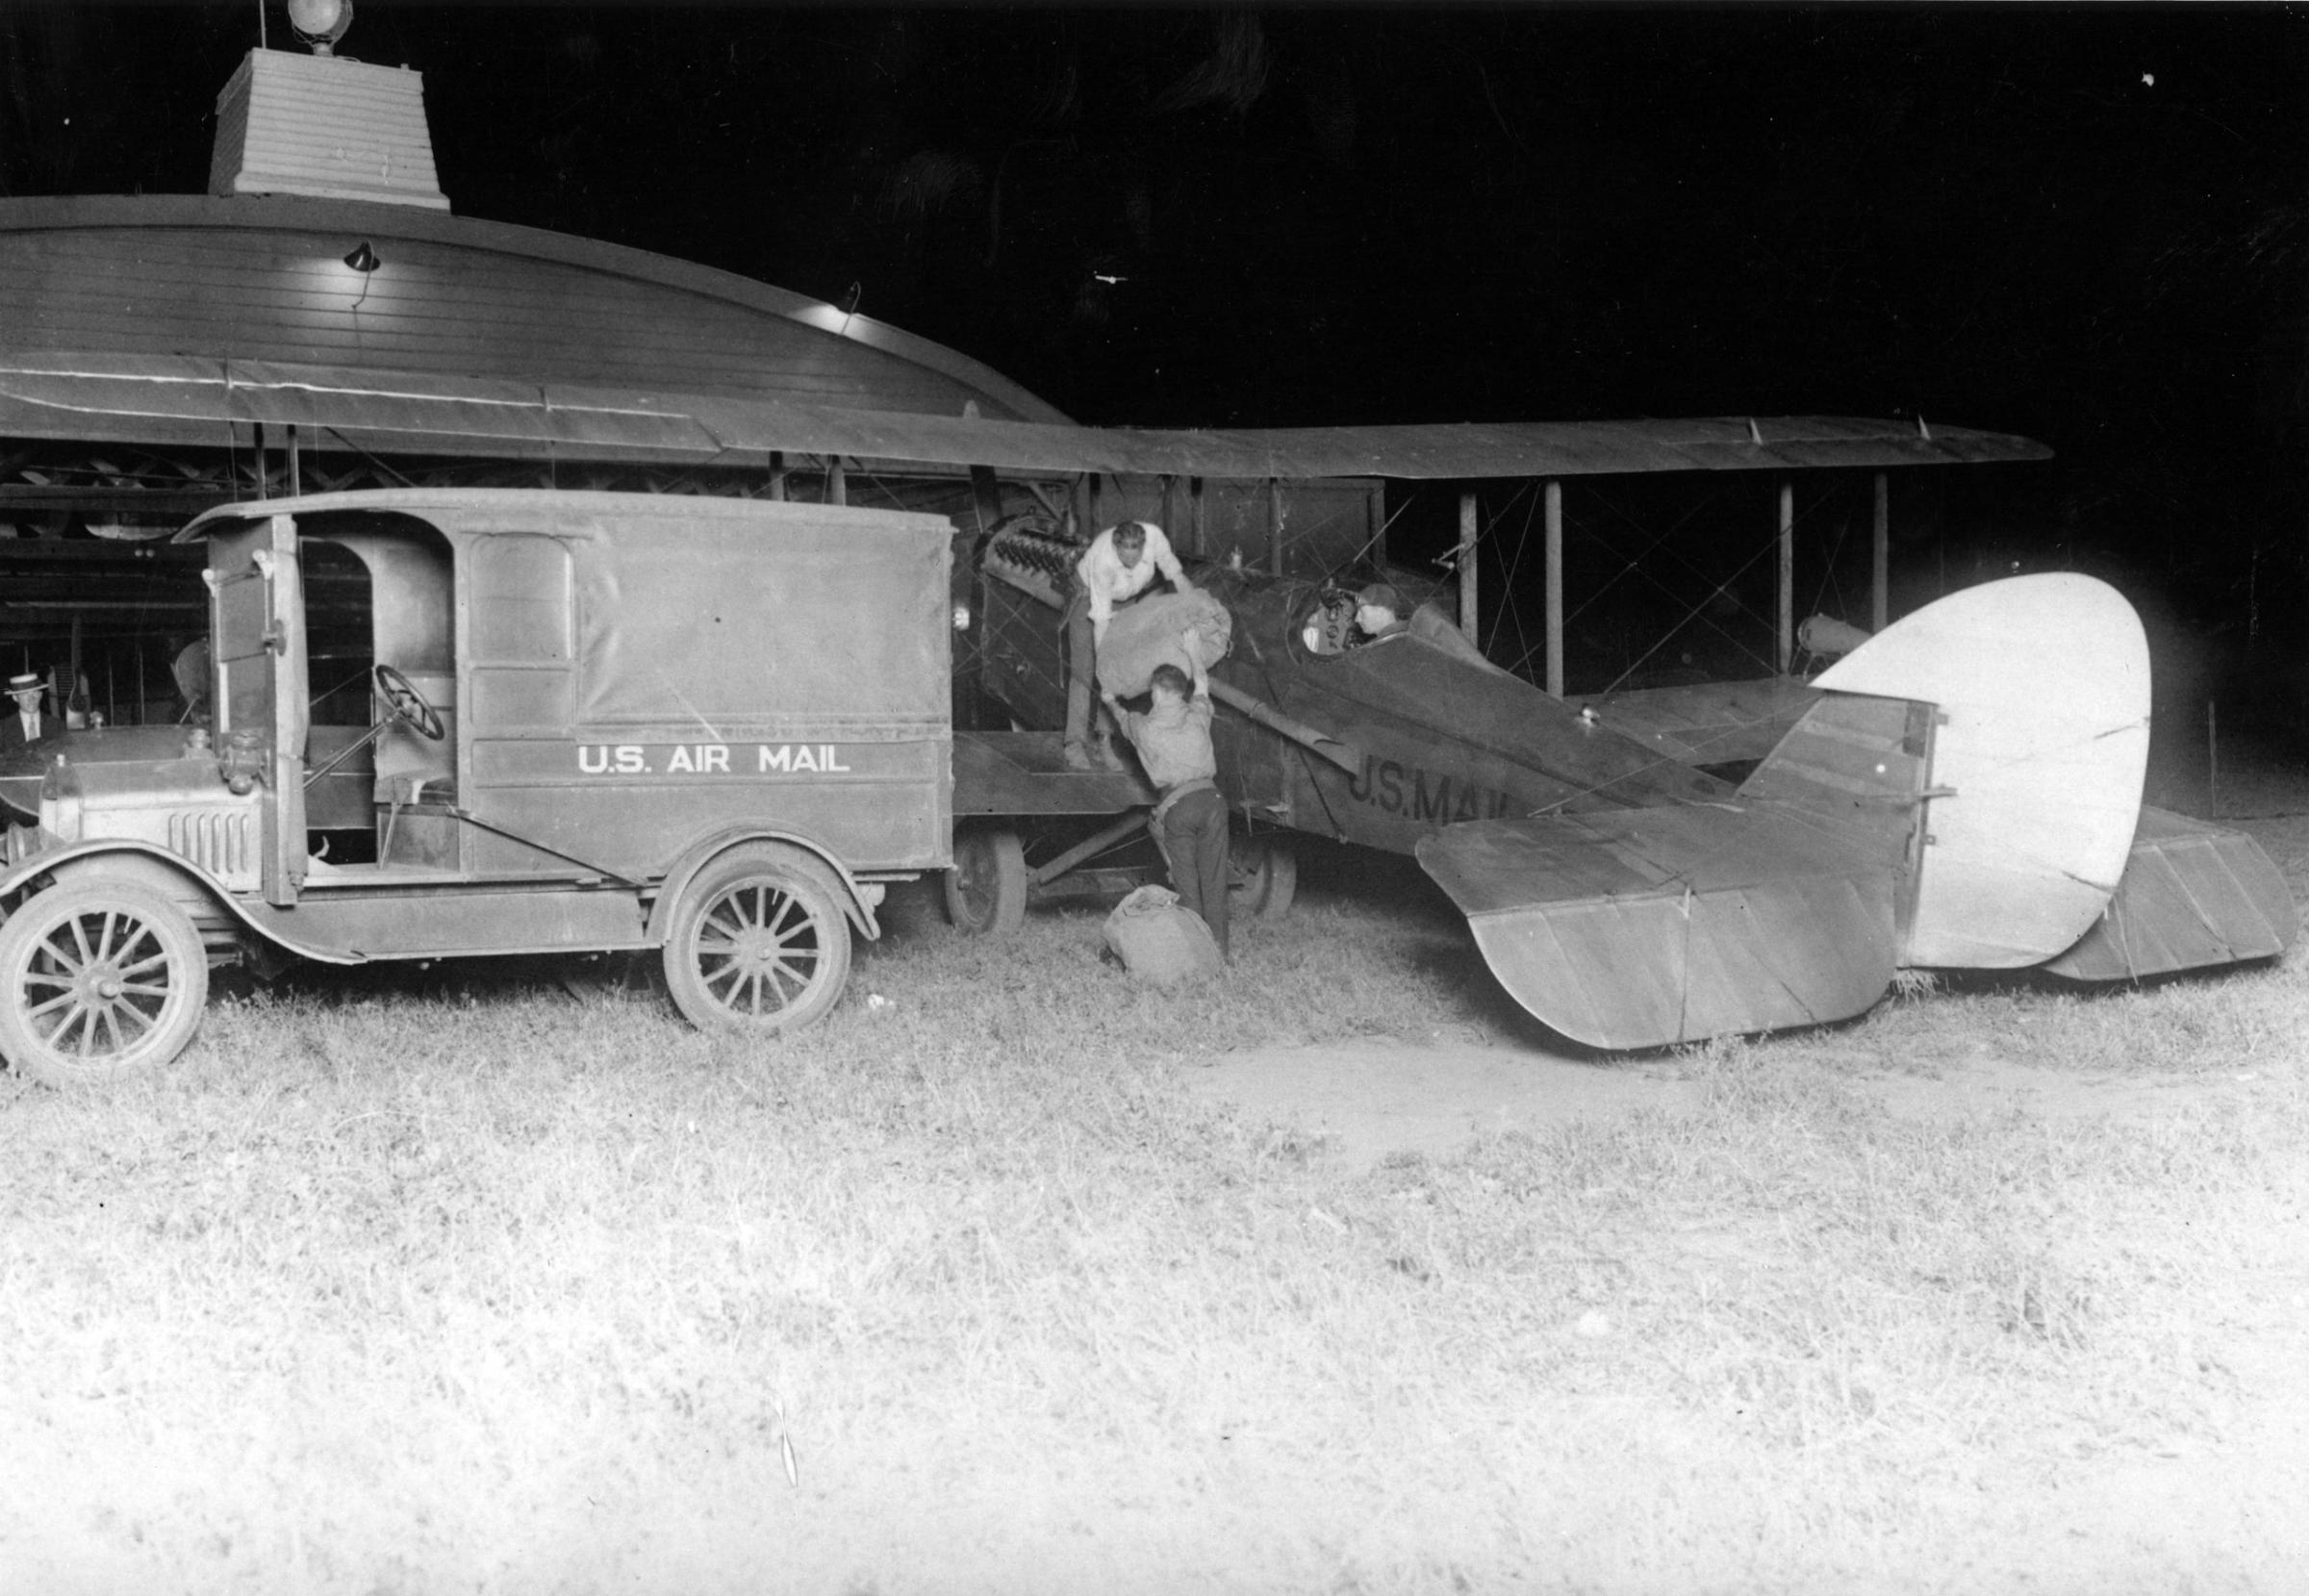 Postal employees loading mail into a de Havilland mail airplane at Hadley Field in New Brunswick, New Jersey. Regularly scheduled transcontinental airmail service, which had begun in the summer of 1924, was extended to east coast with the completion of a series of airmail beacons that helped guide pilots across the country. Airmail pilots Dean Smith and James DeWitt Hill carried mail out of Hadley Field on the of July 1, 1925. Smith ran out of gas and crashed outside of Cleveland, Ohio. Hill reached Cleveland with his mail, which was transferred onto airplanes with new pilots for the next part of the transcontinental journey.